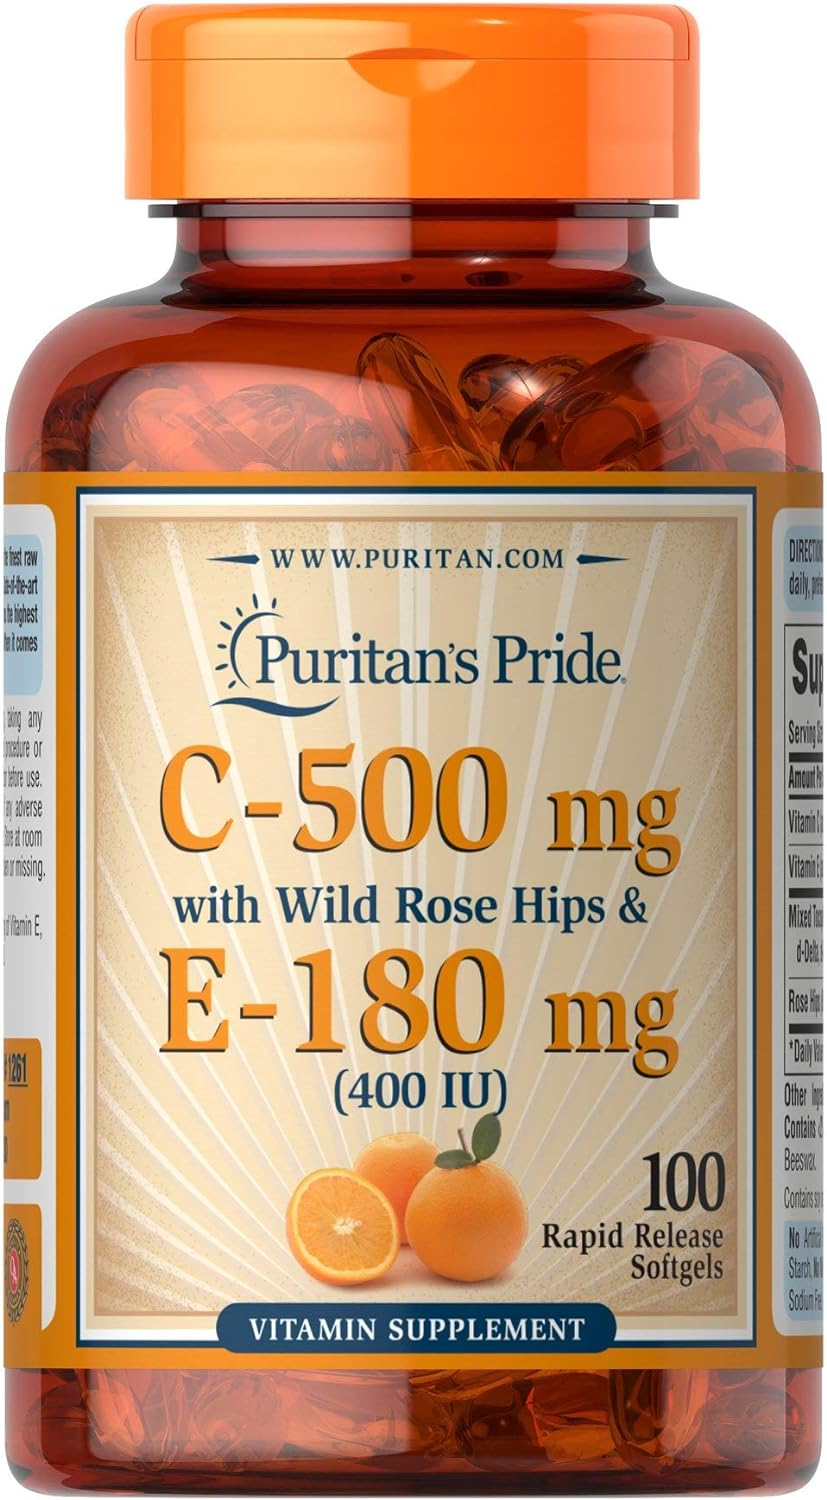 Puritan's Pride Vitmain C 500 mg & E 180 mg with Rose Hips for Immune & Antioxidant Support by Puritan's Pe for Healthy Skin and Immune System Support, 100 Softgels